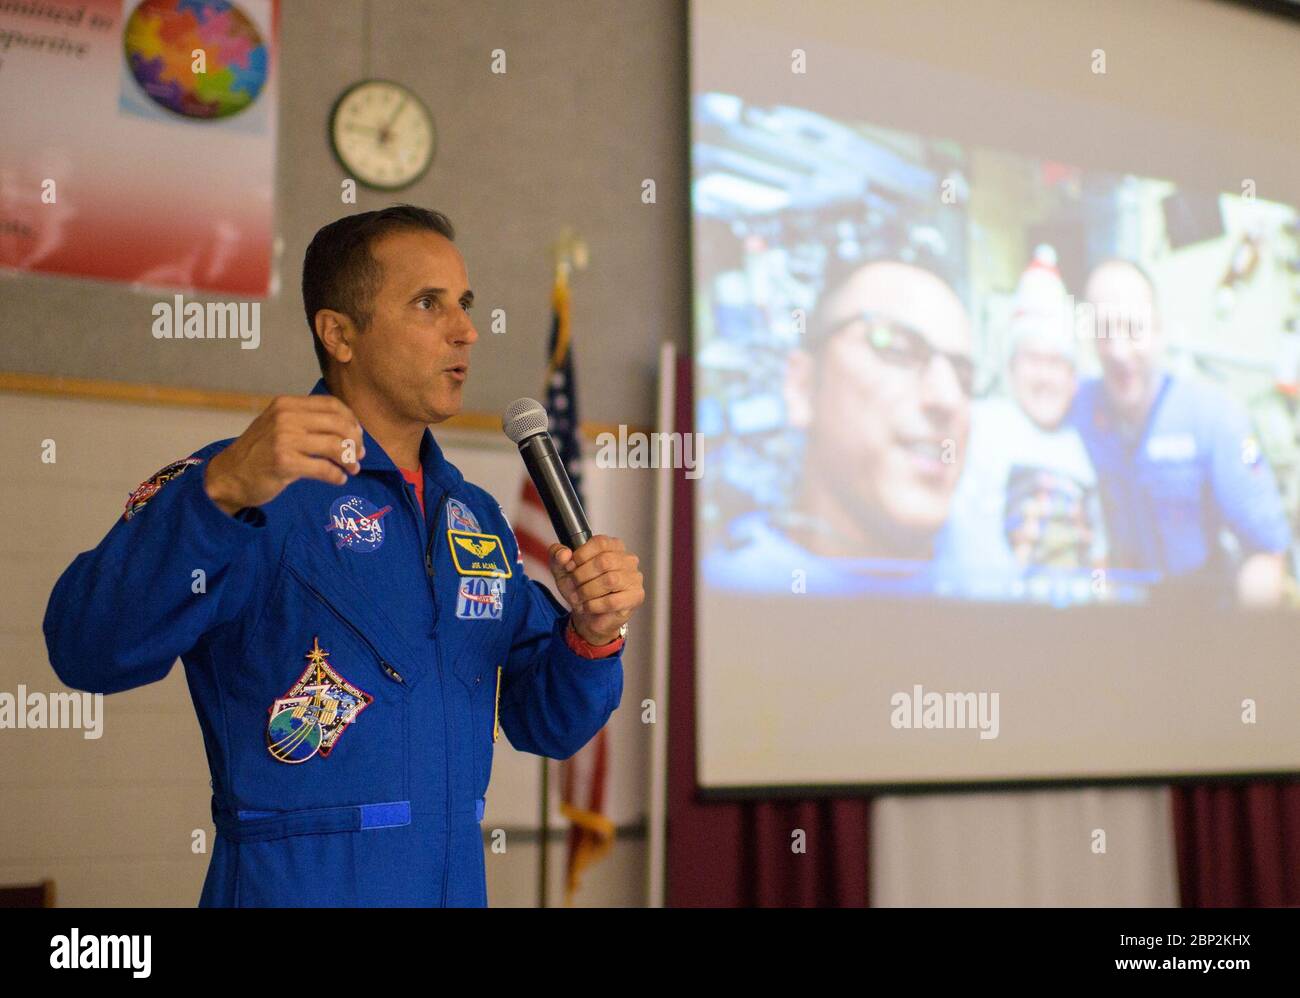 Vande Hei and Acaba at Walt Whitman Middle School  NASA astronaut Joe Acaba speaks about his time onboard the International Space Station during a presentation to students at Walt Whitman Middle School, Thursday, June 14, 2018 in Alexandria, Va. Acaba and astronaut Mark Vande Hei answered questions from the audience and spoke about their experiences aboard the International Space Station for 168 days as part of Expedition 53 and 54. Stock Photo